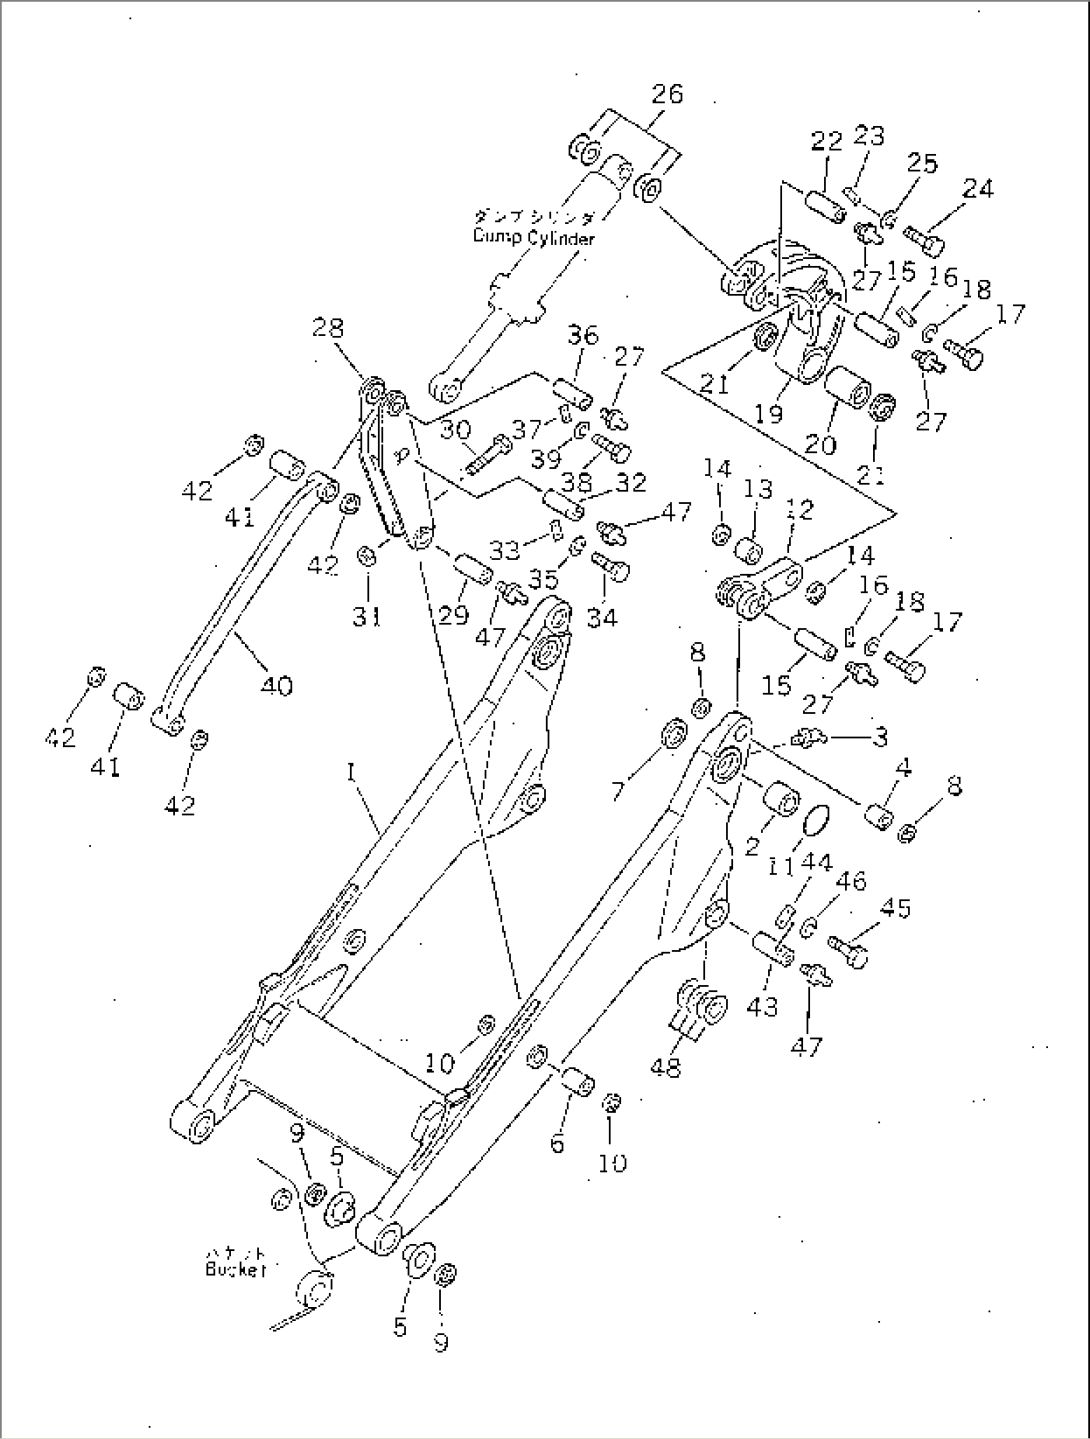 BUCKET LINKAGE (FOR LONG LIFT ARM)